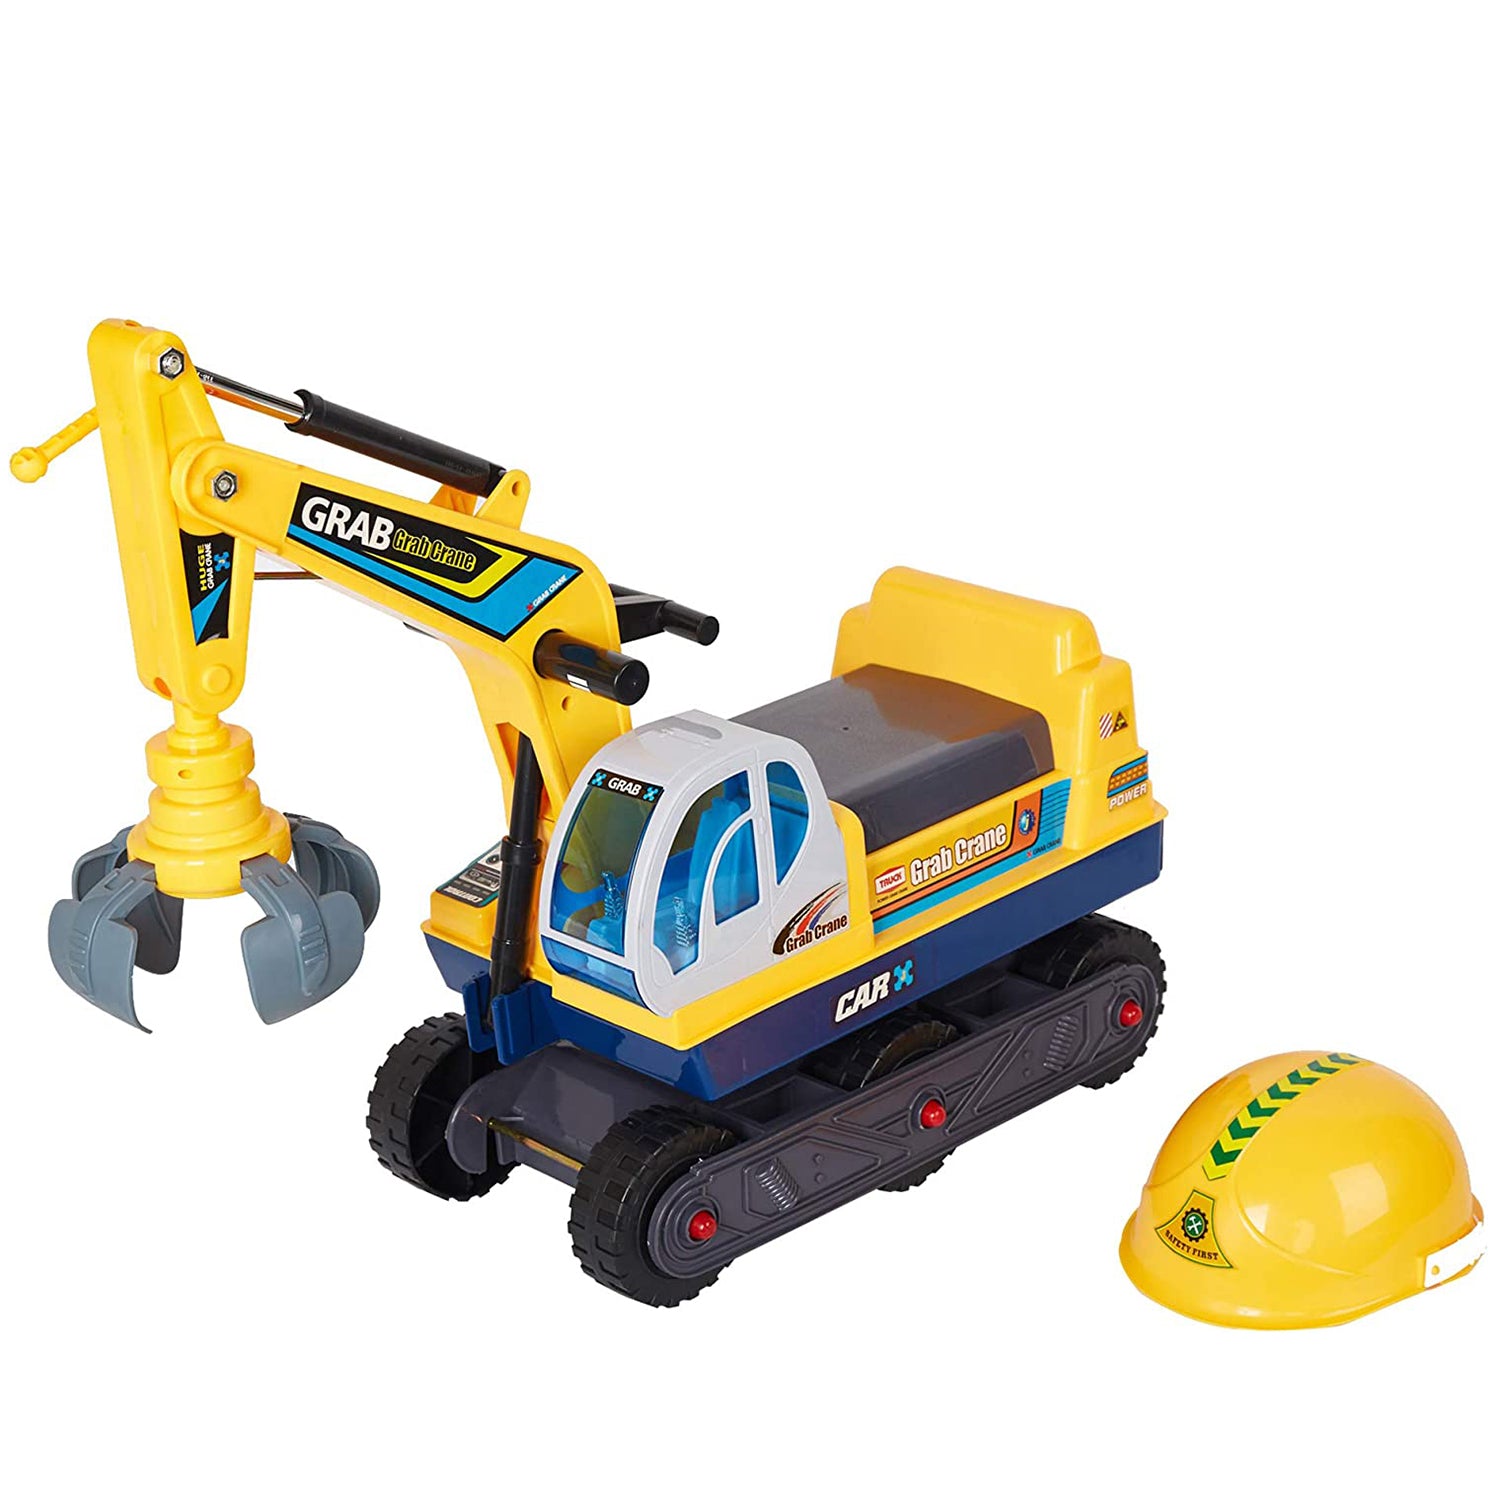 2-in-1 Kids Ride-on Crane Construction Grabber Toy with Engineering Hat